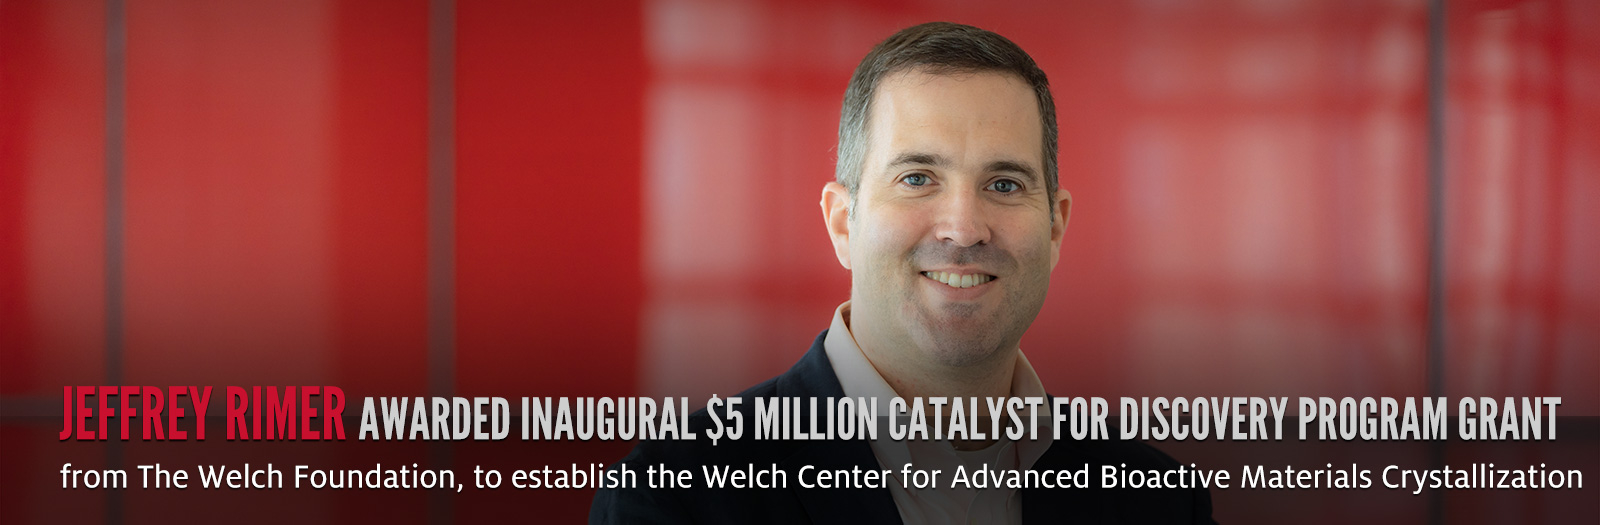 Jeffrey Rimer Awarded inaugural $5 million Catalyst for Discovery Program Grant from The Welch Foundation, to establish the Welch Center for Advanced Bioactive Materials Crystallization